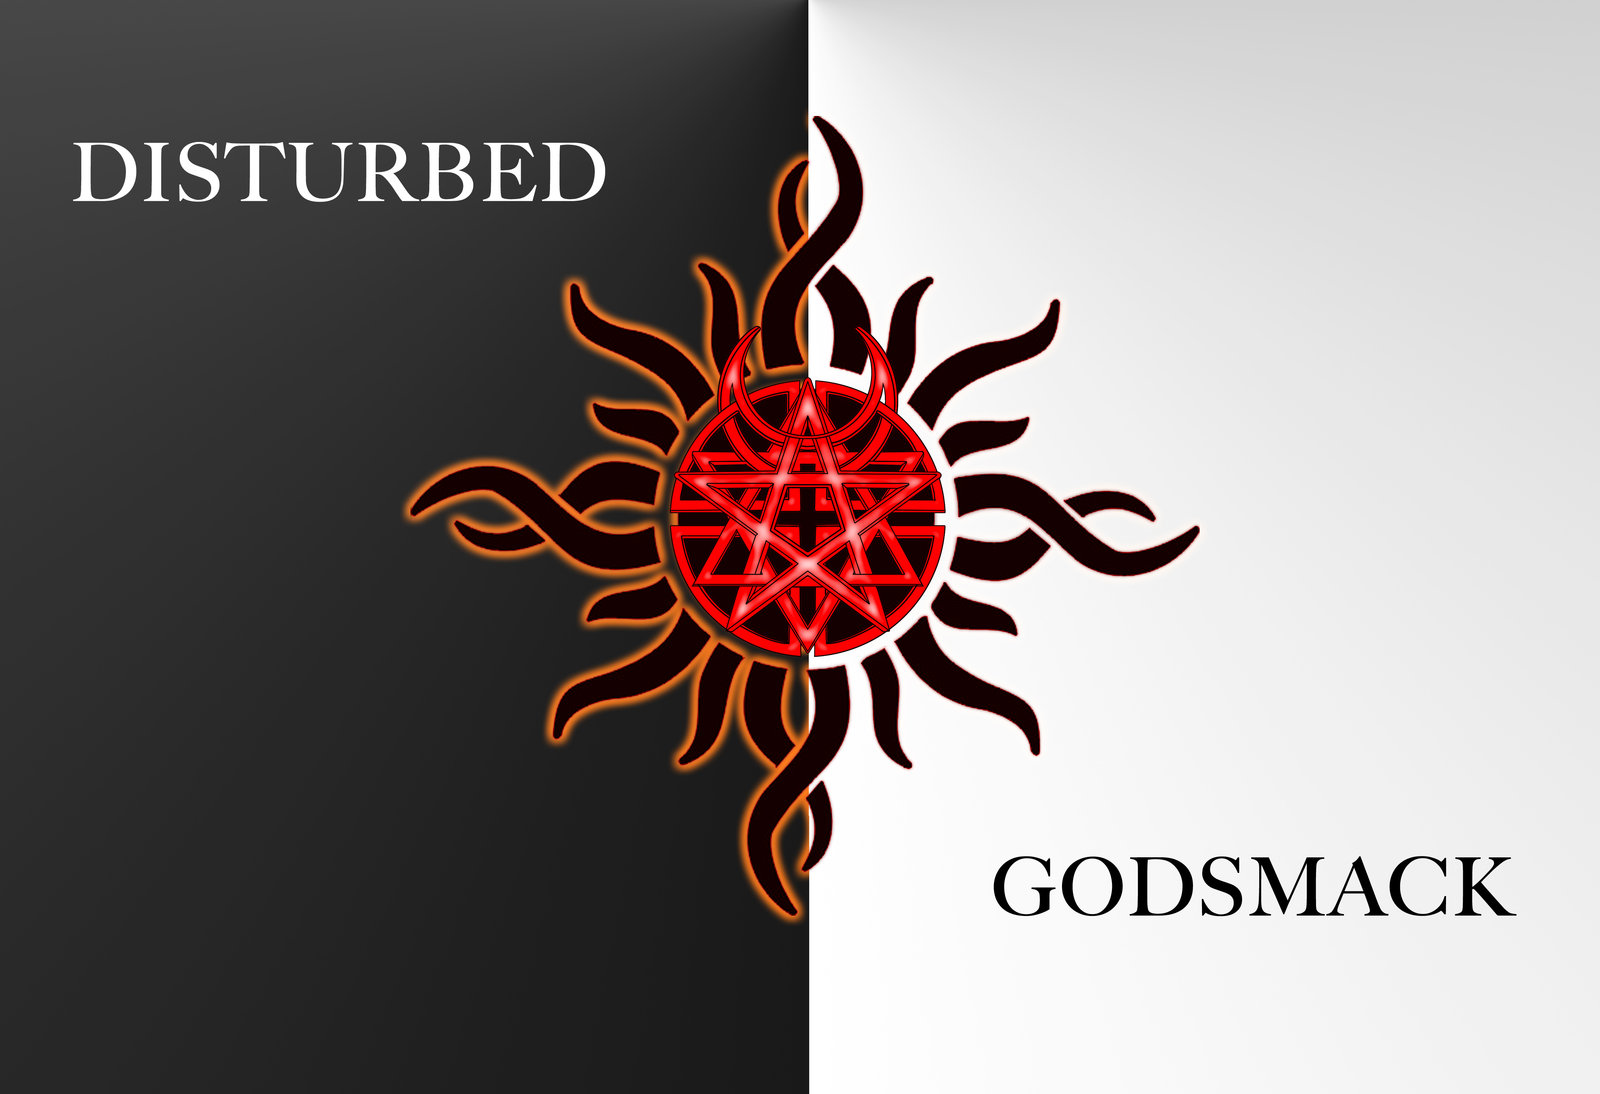 android disturbed (band), music, crossover, godsmack